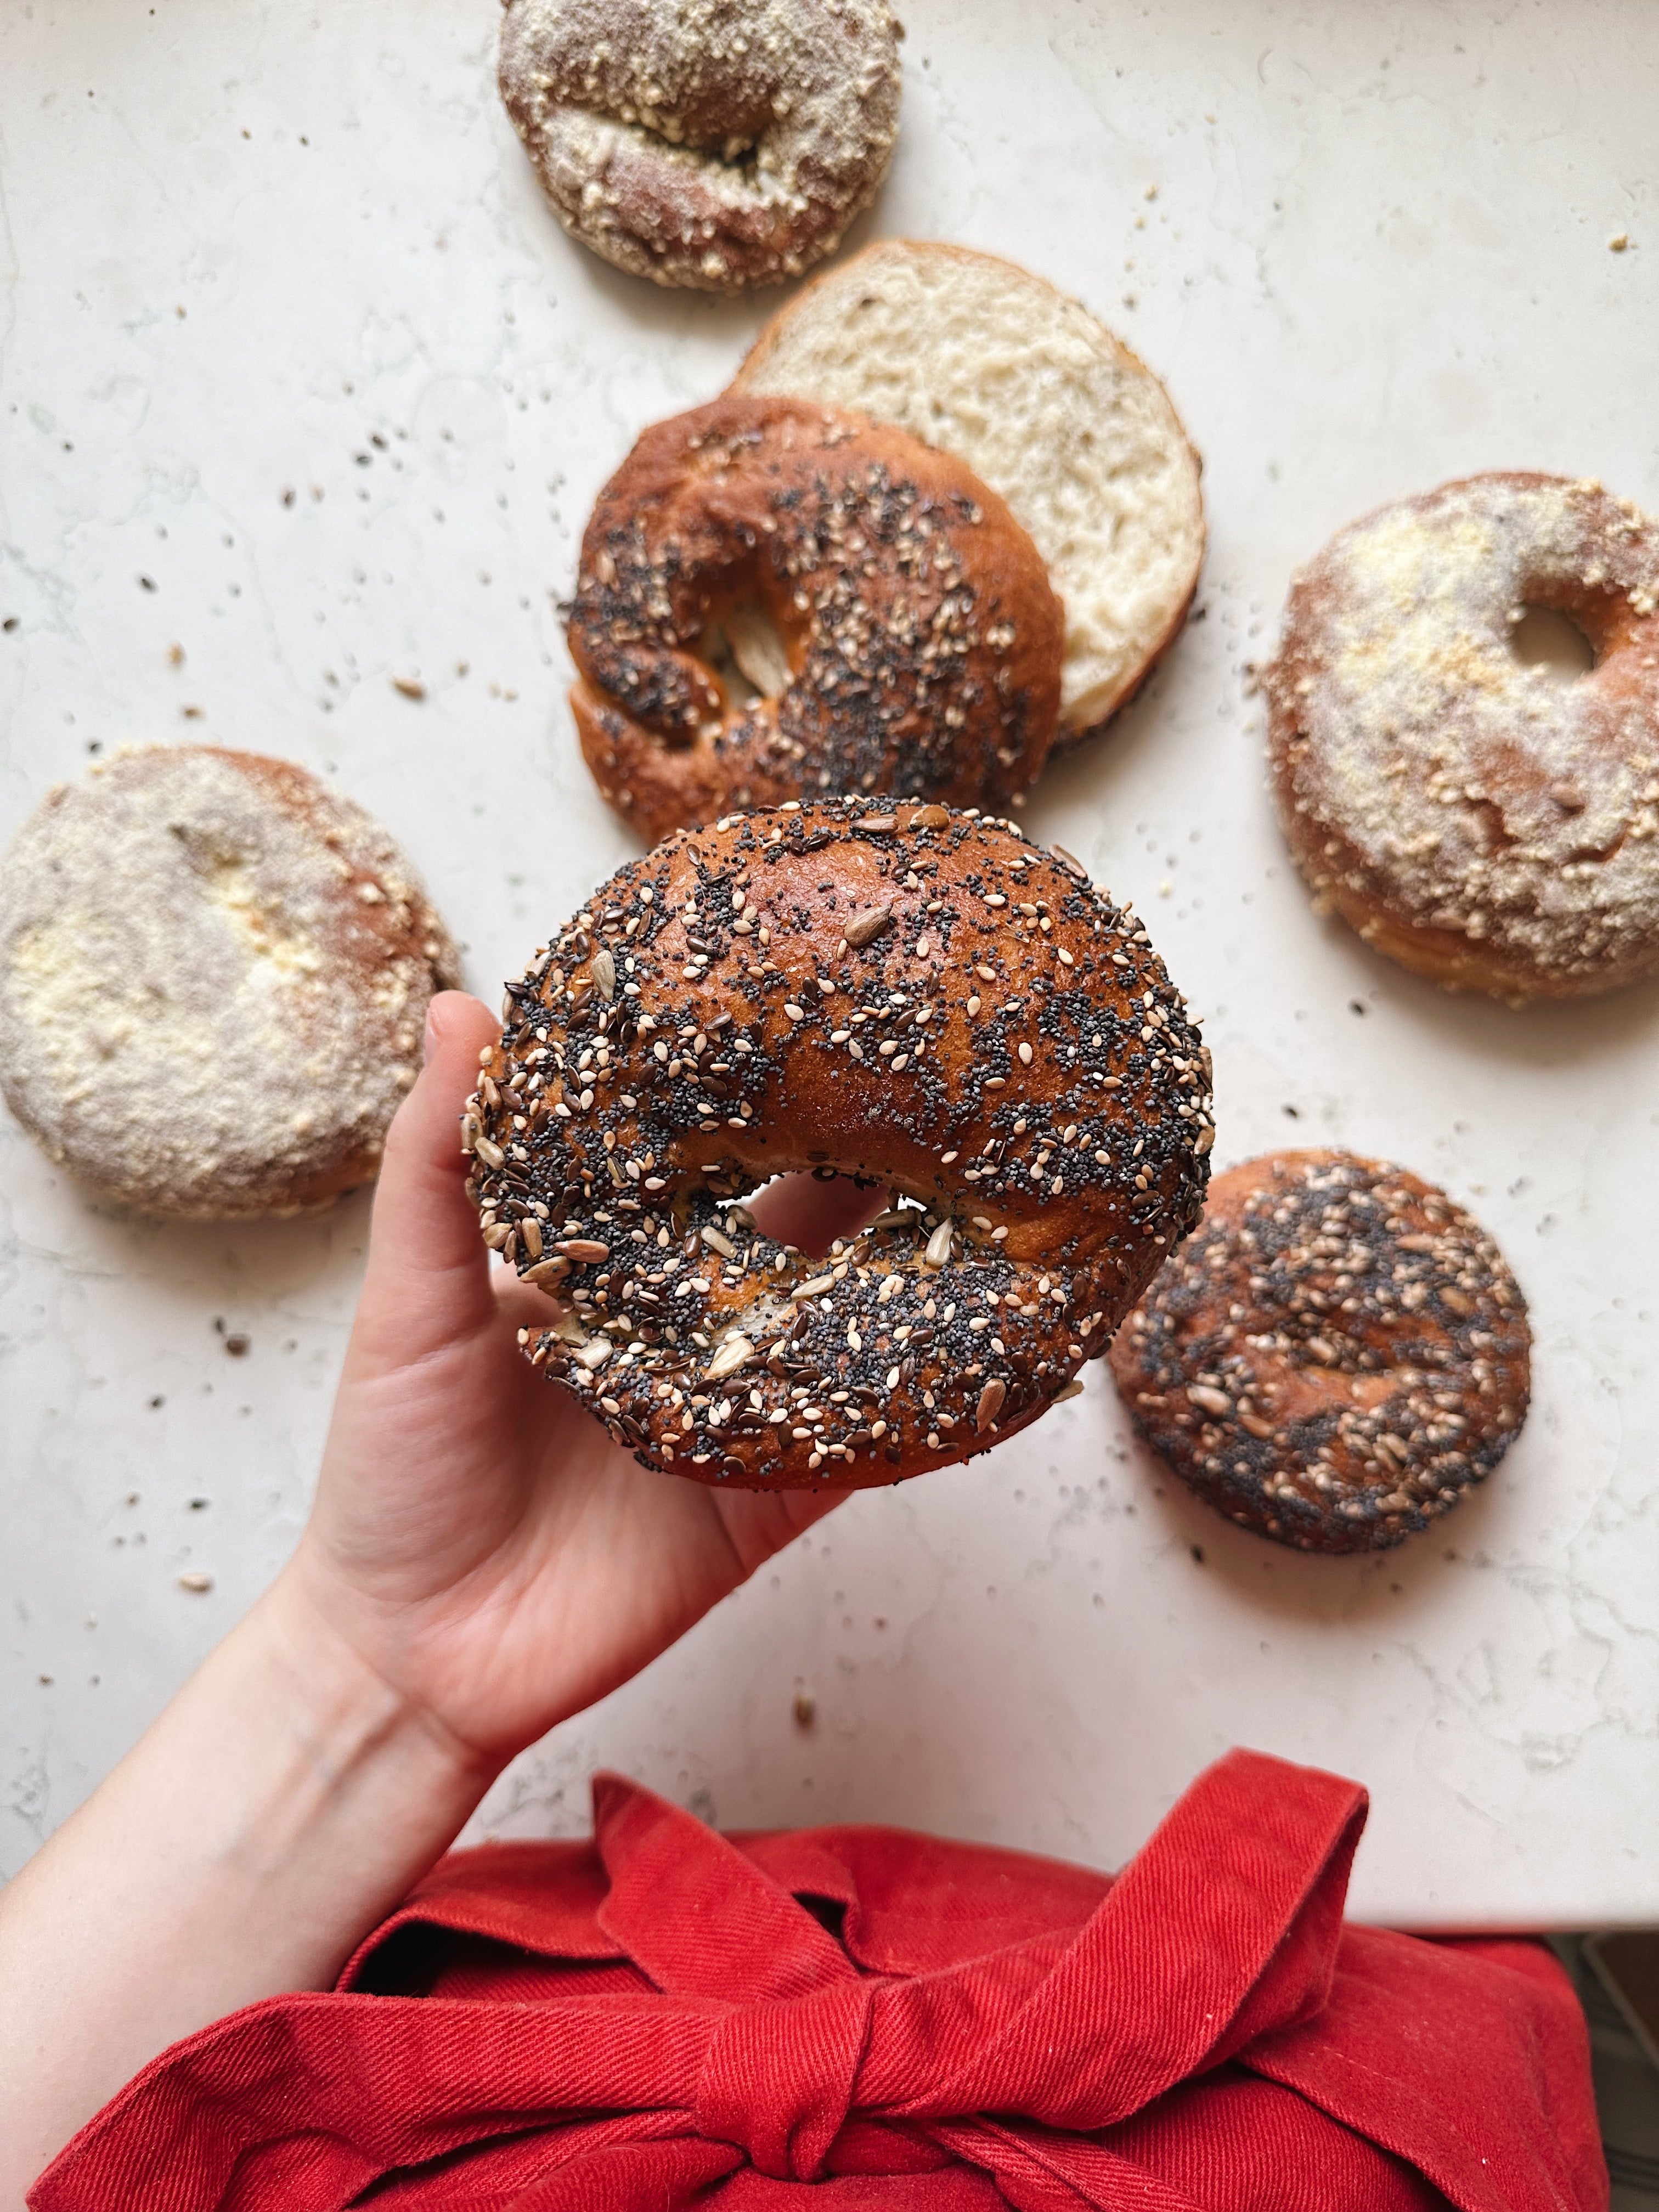 NEW YORK STYLE BAGELS